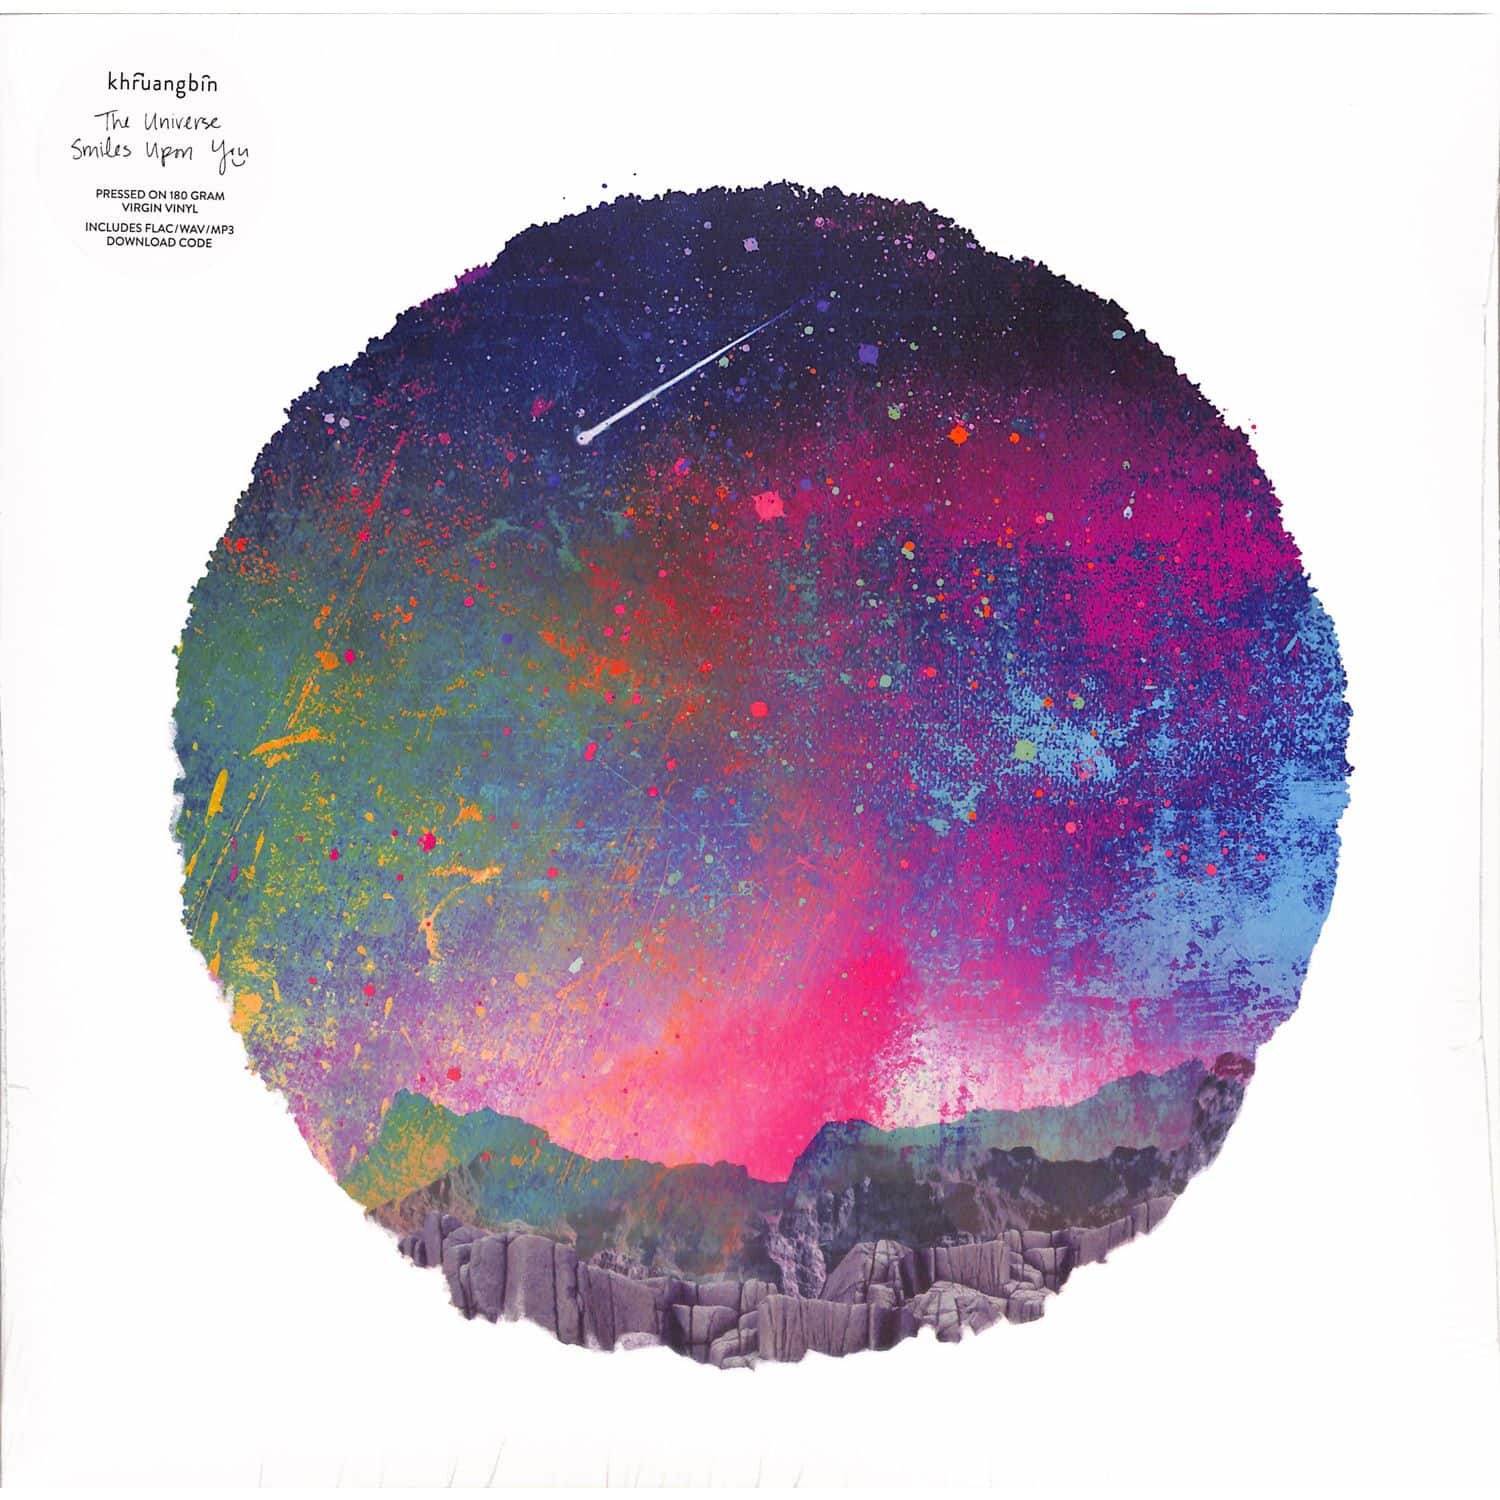 Khruangbin - THE UNIVERSE SMILES UPON YOU 